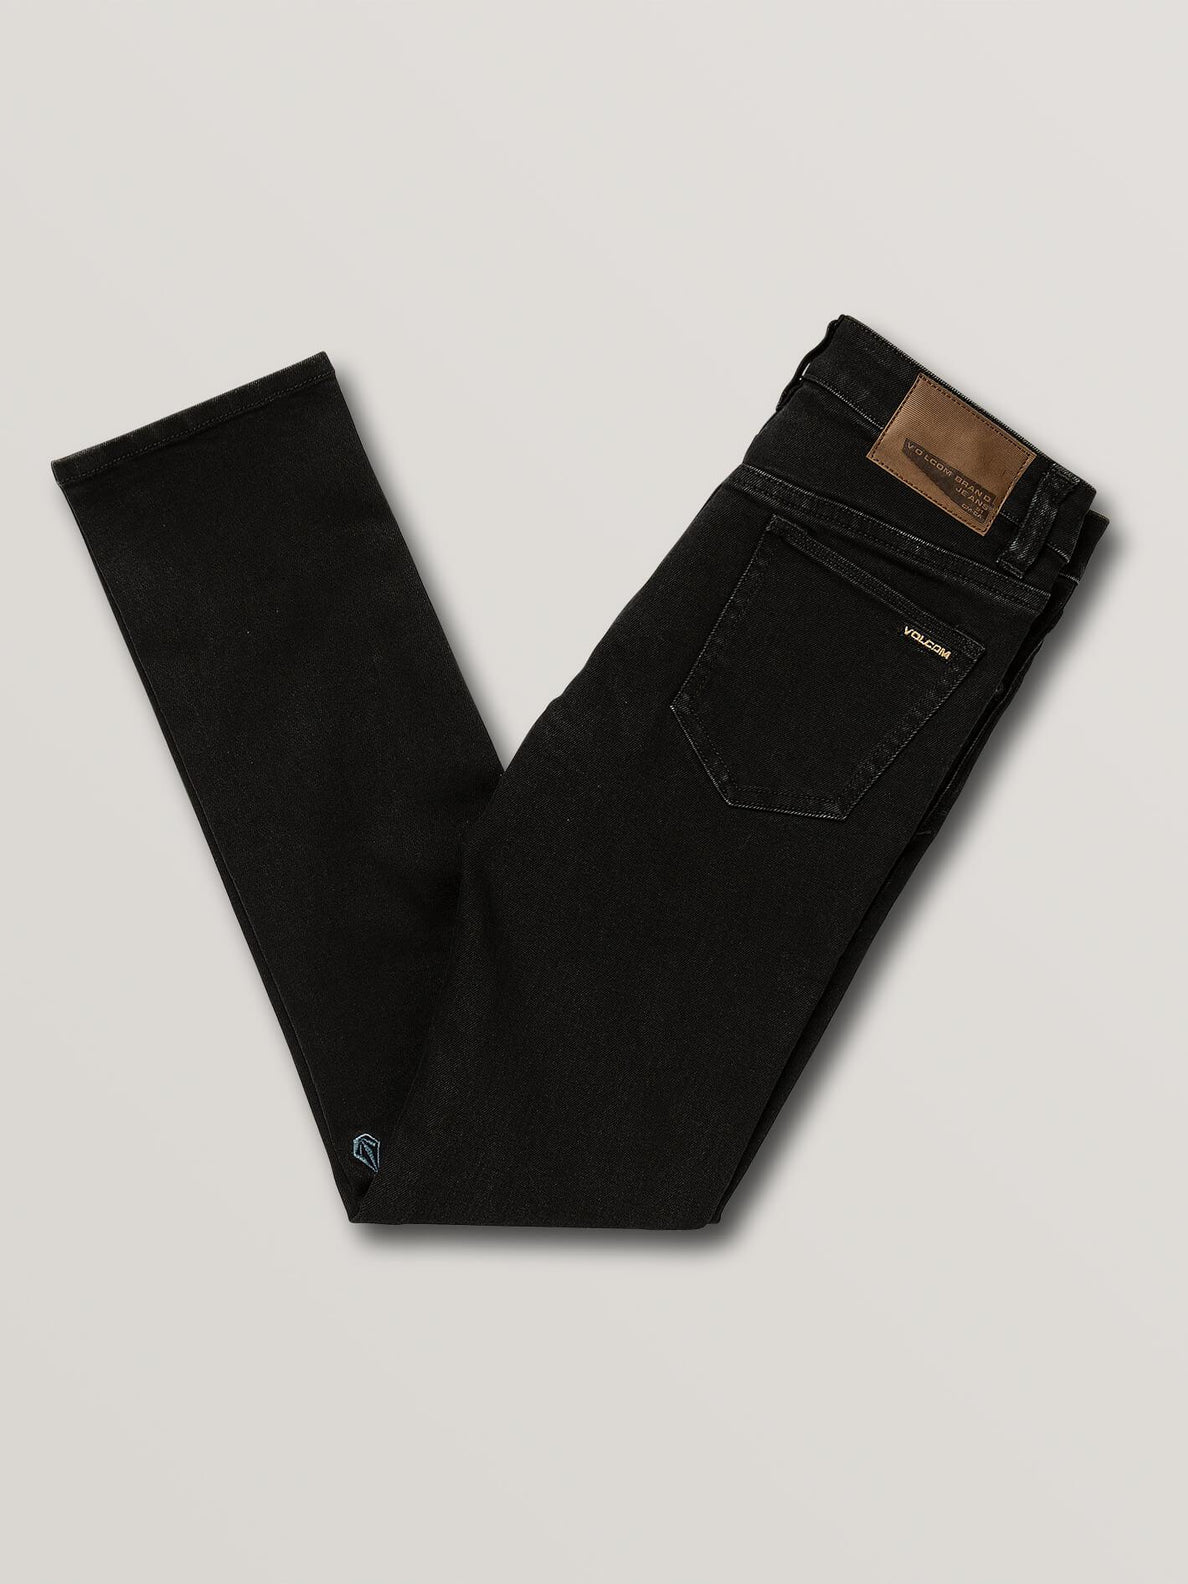 youth black jeans